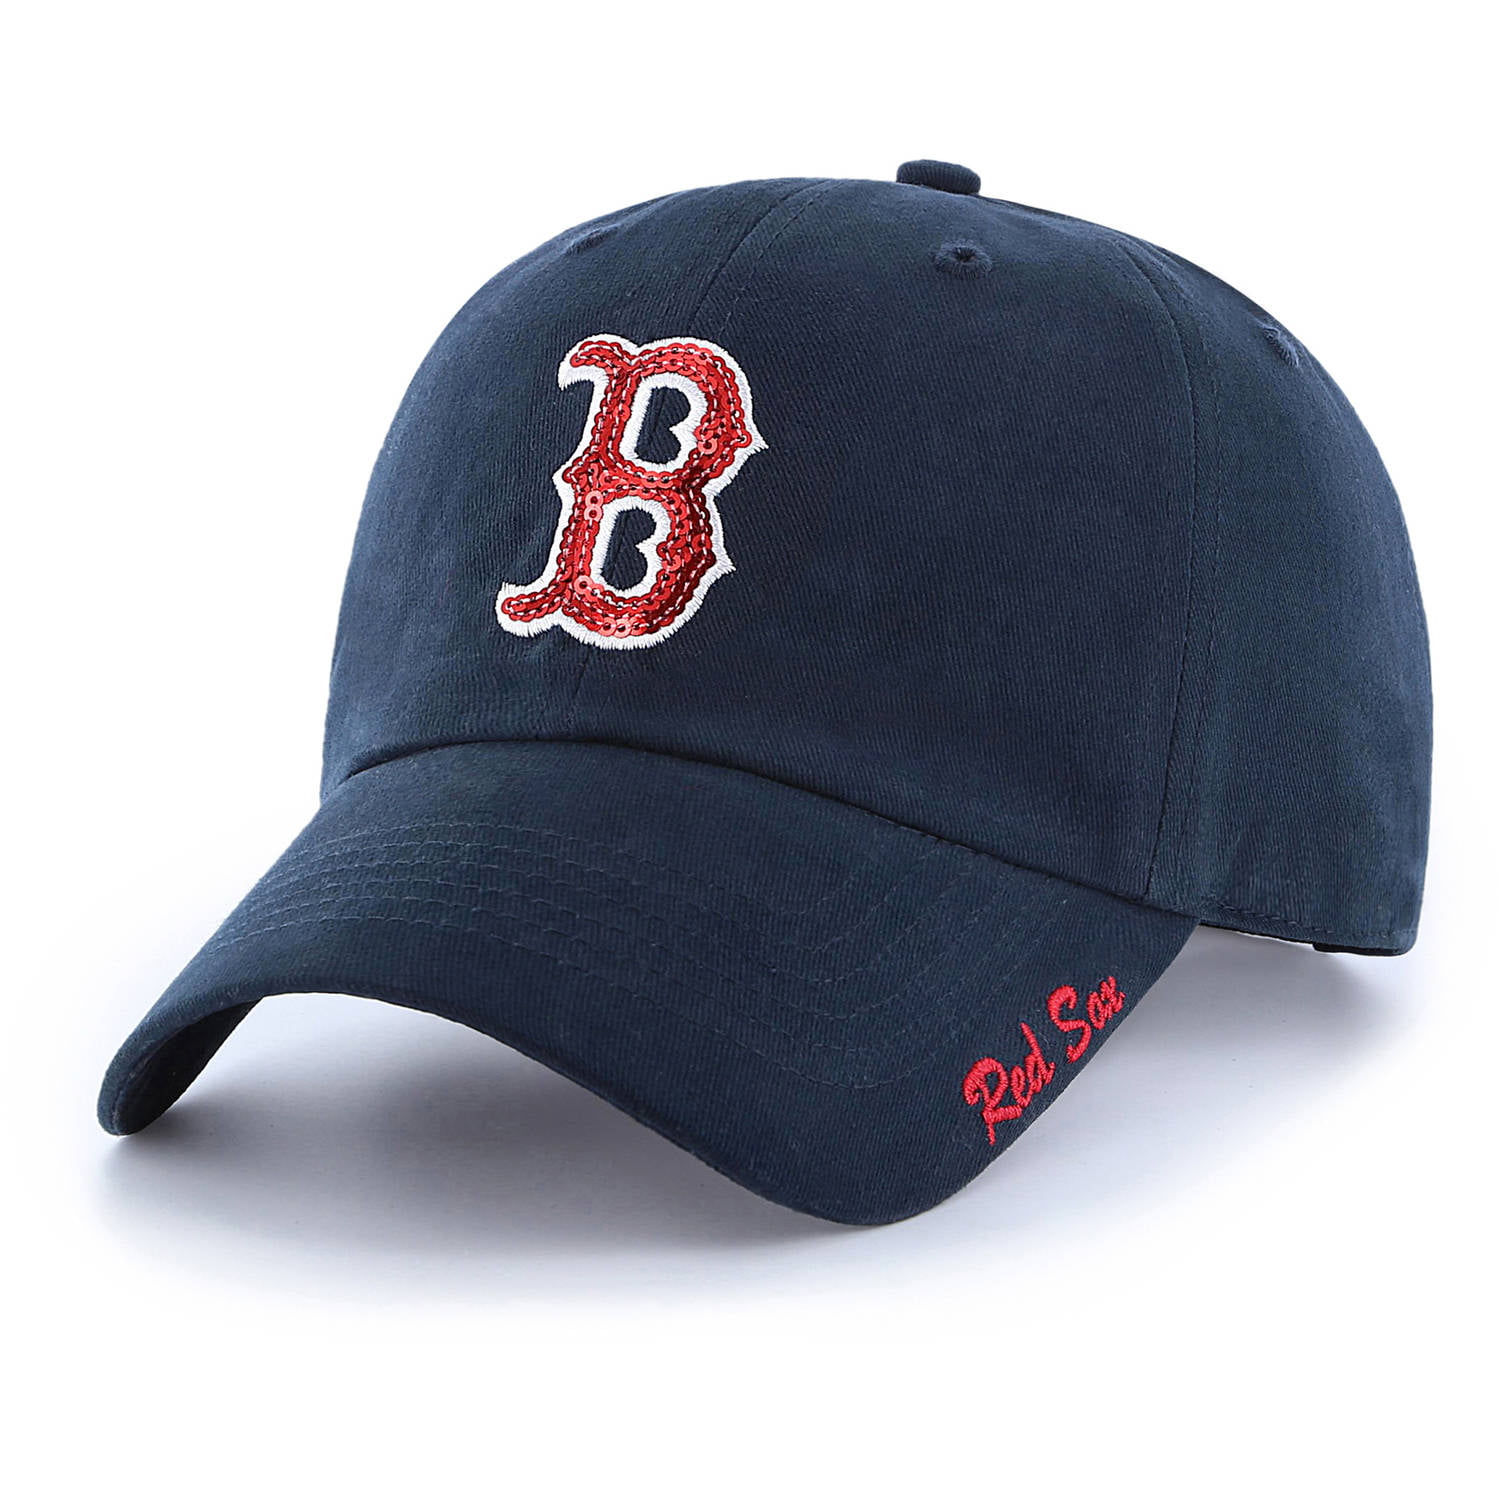 mlb red sox hat